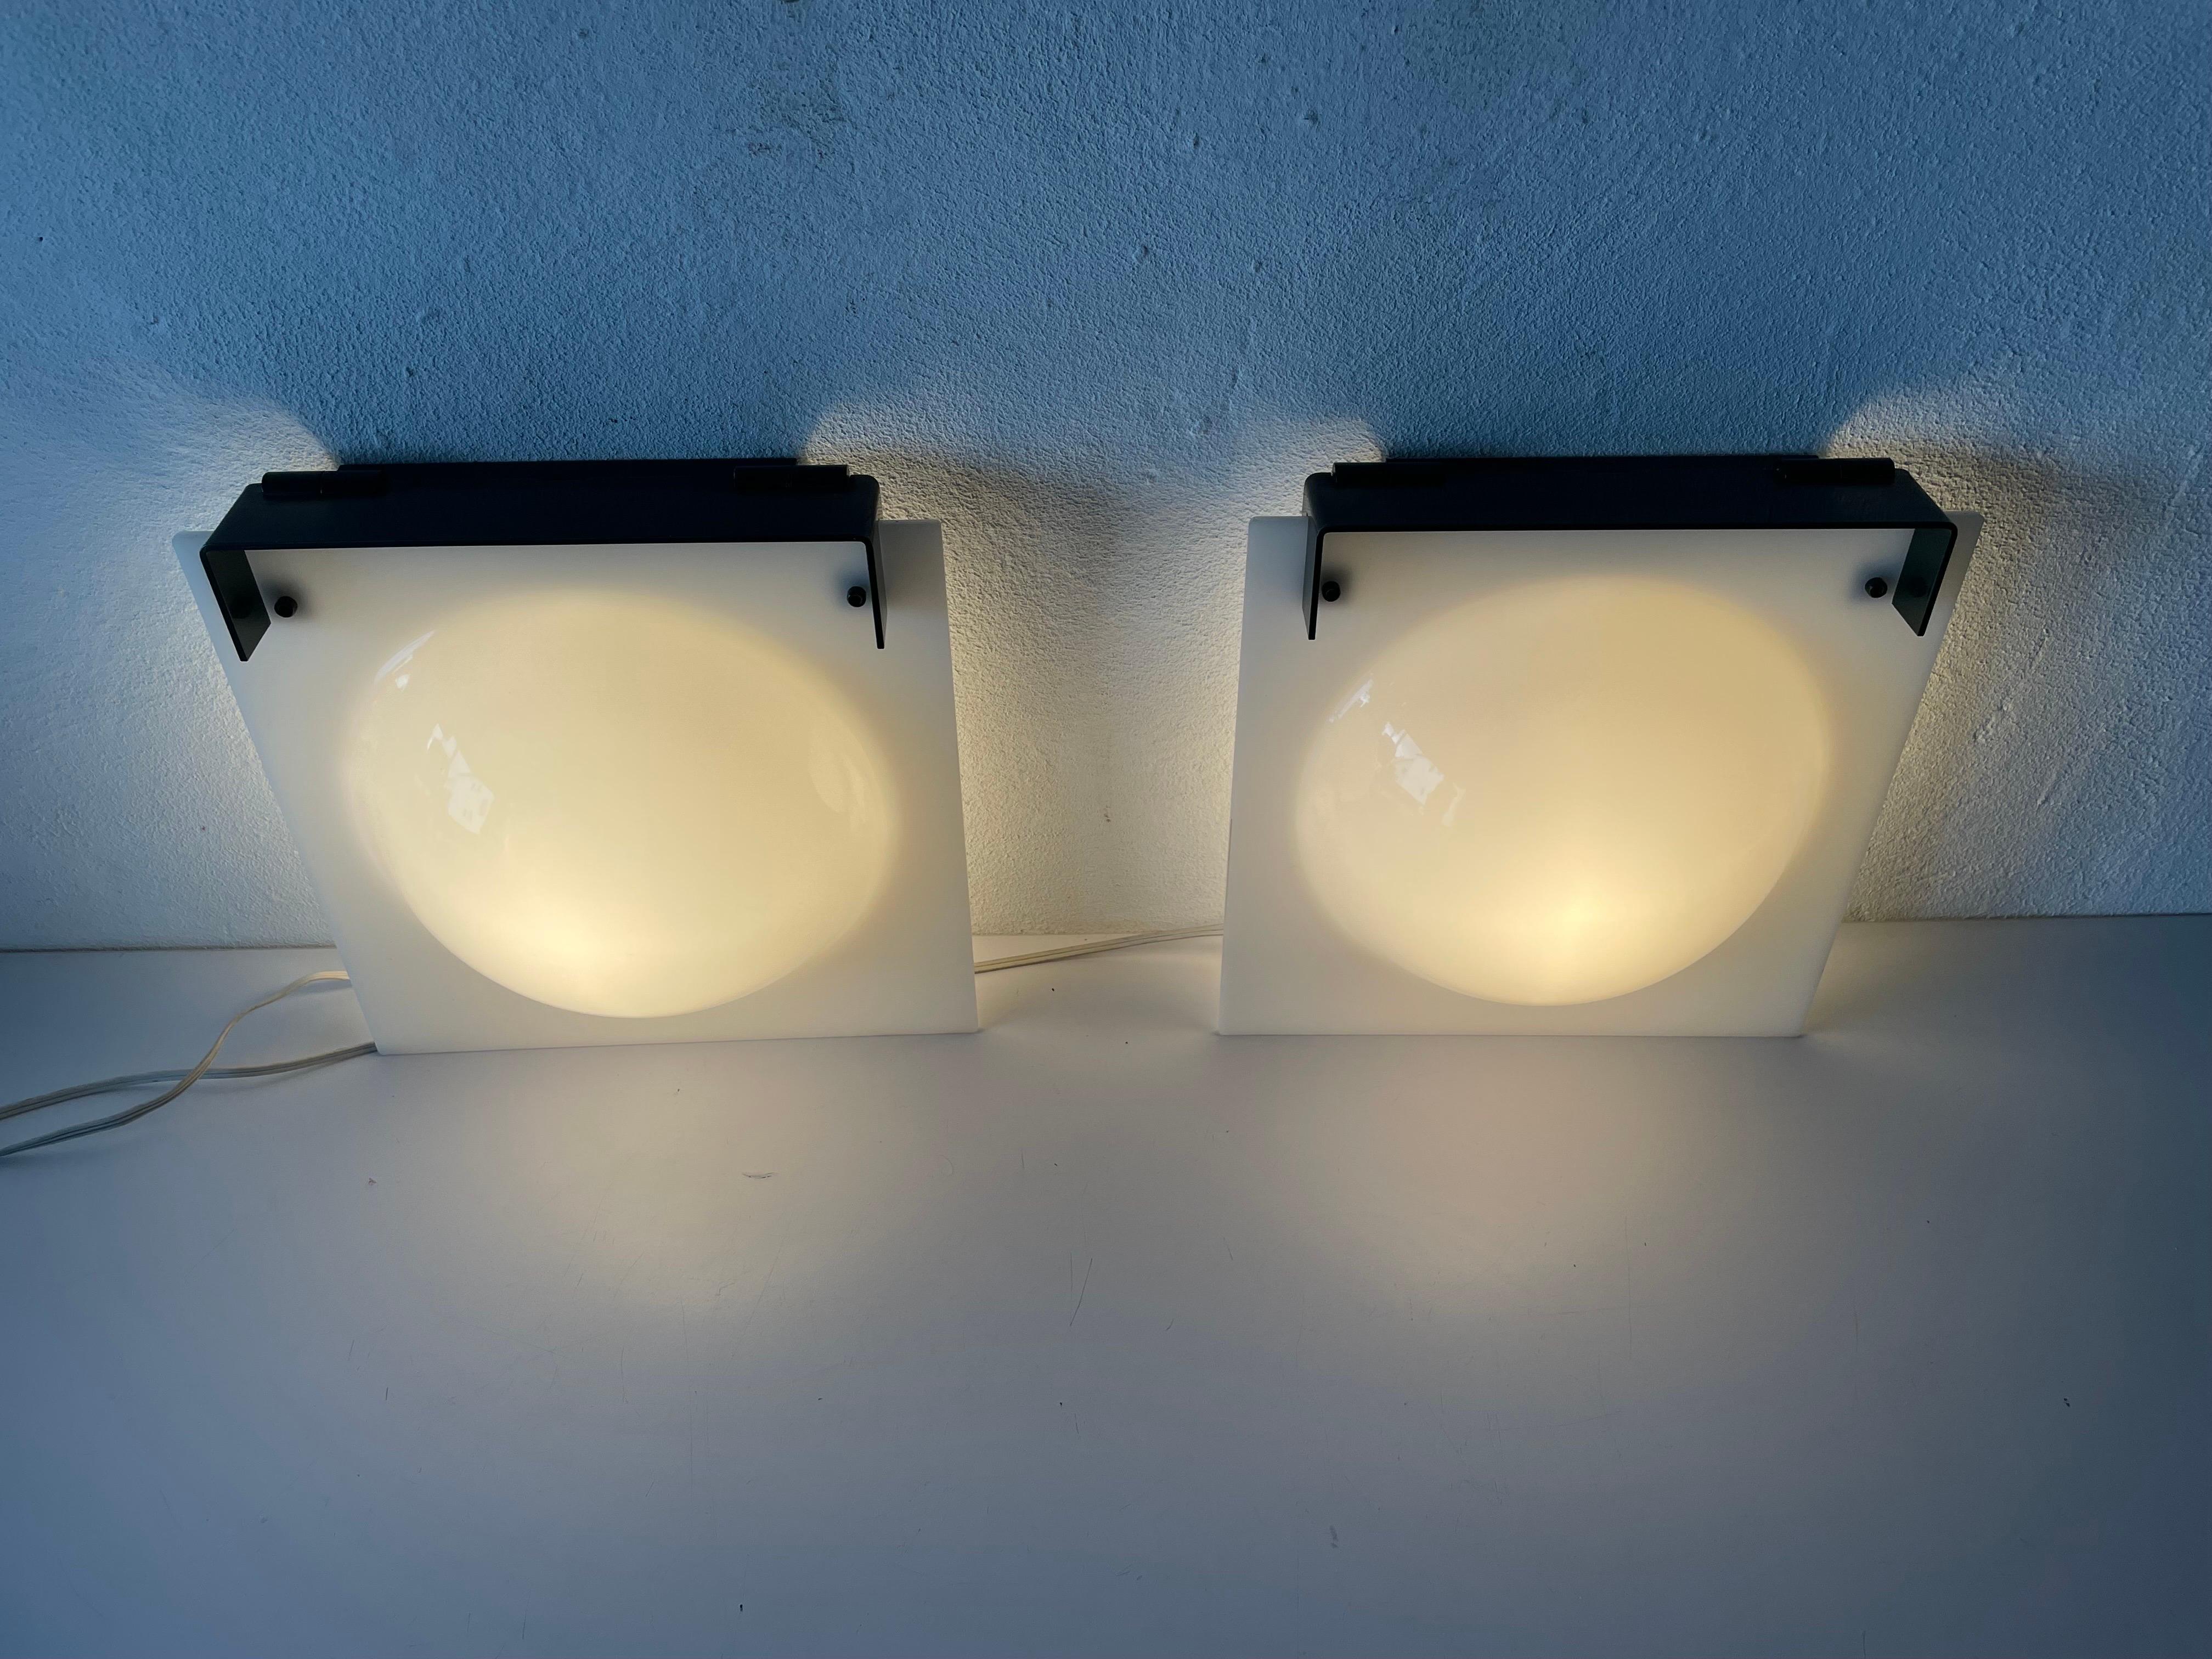 High Quality Plexiglass Bubble Design Pair of Wall Lamps, 1960s, Italy For Sale 7